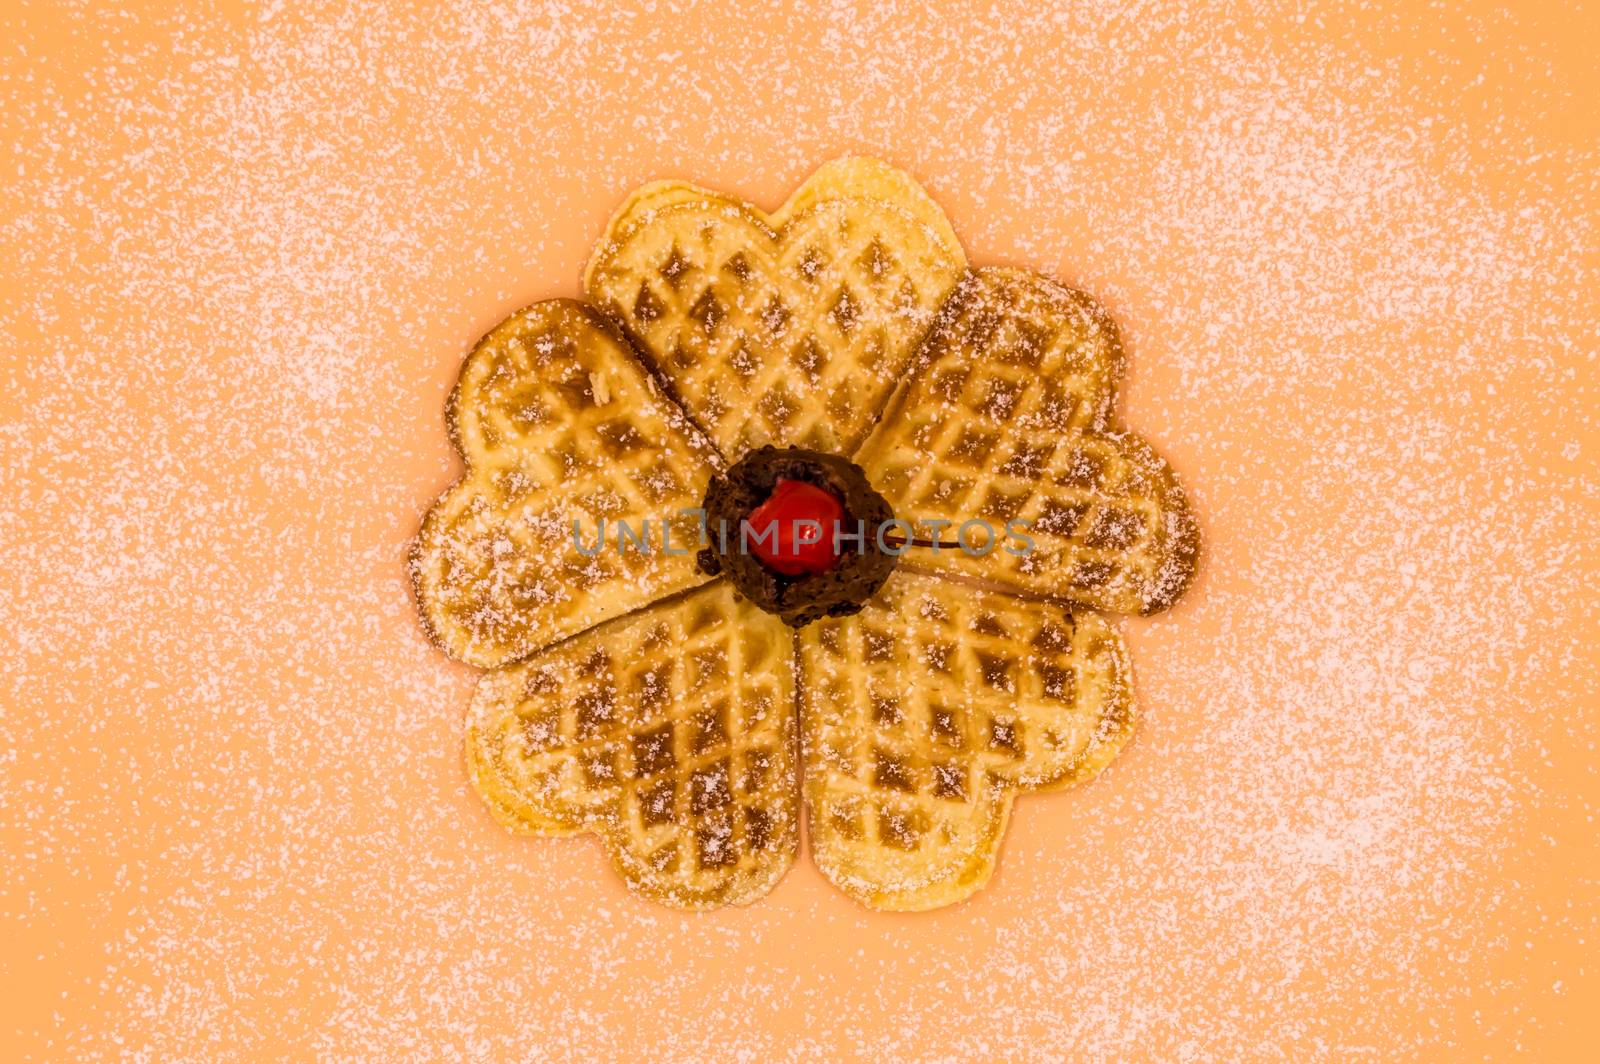 Homemade waffles with powdered sugar, a scoop of vanilla ice cream and a cherry on a pink background, isolated image of food.